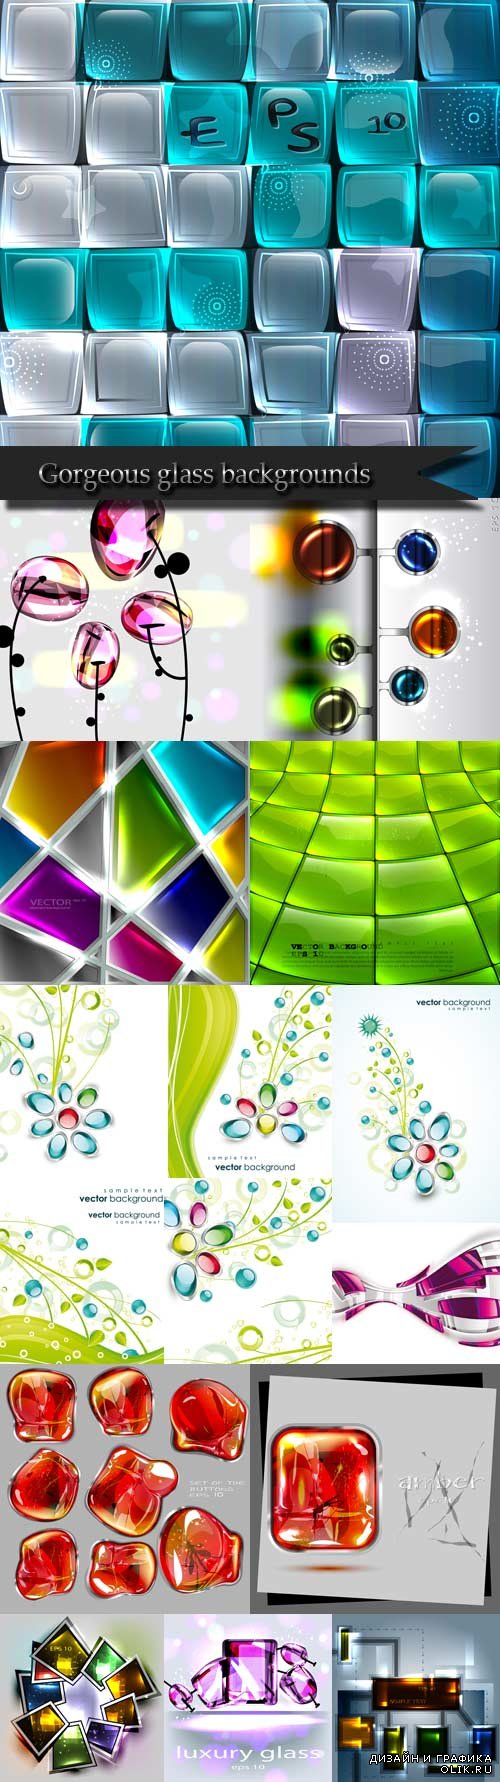 Gorgeous glass backgrounds